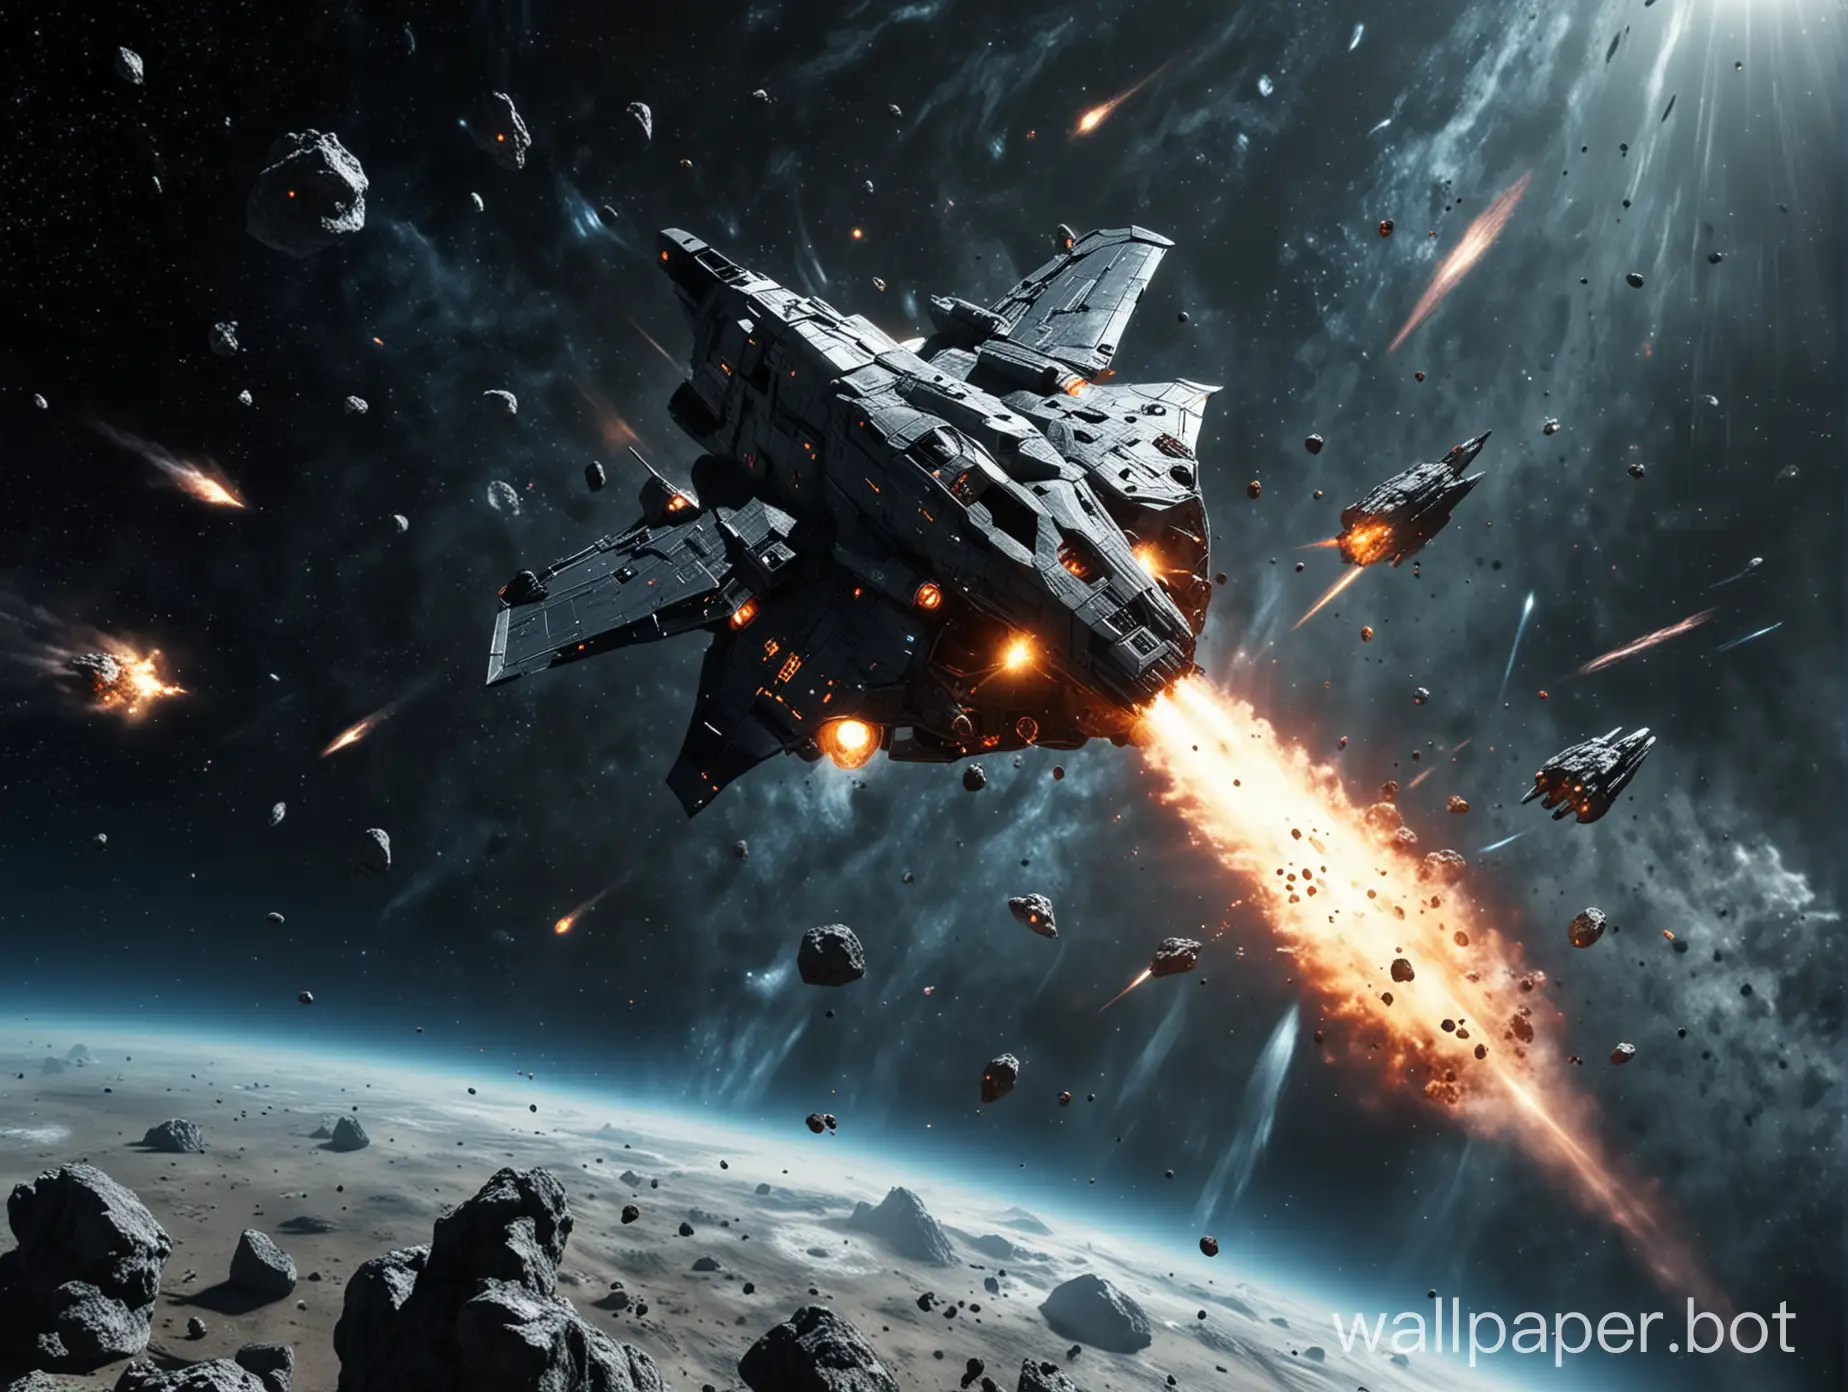 space fighter flying into space and firing at asteroids, asteroid explosions in the background